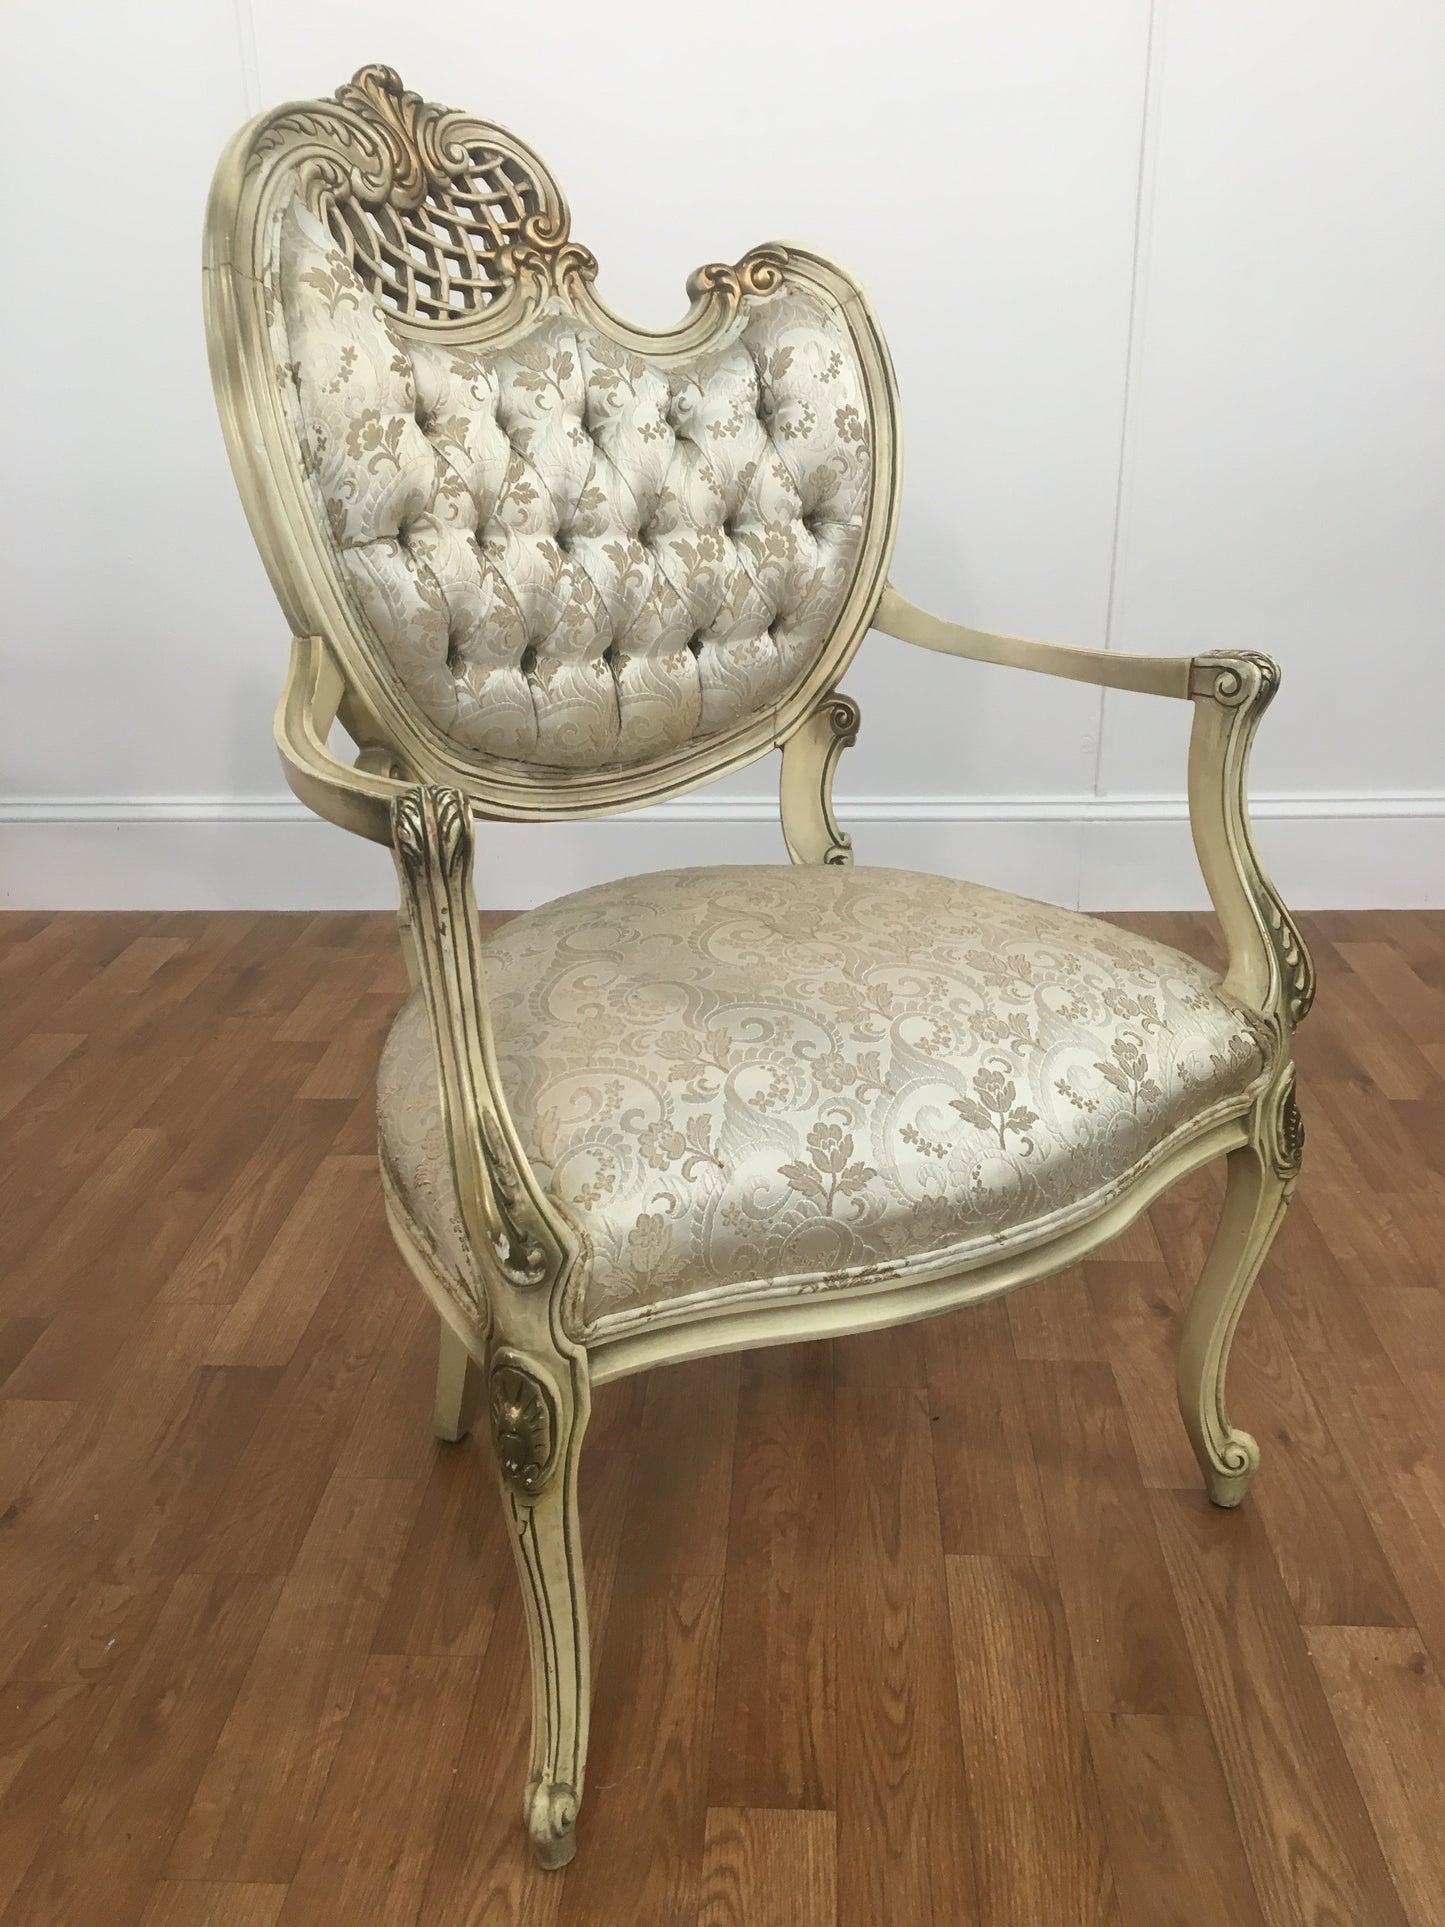 ORNATE IVORY FRENCH PROVINCIAL CHAIR